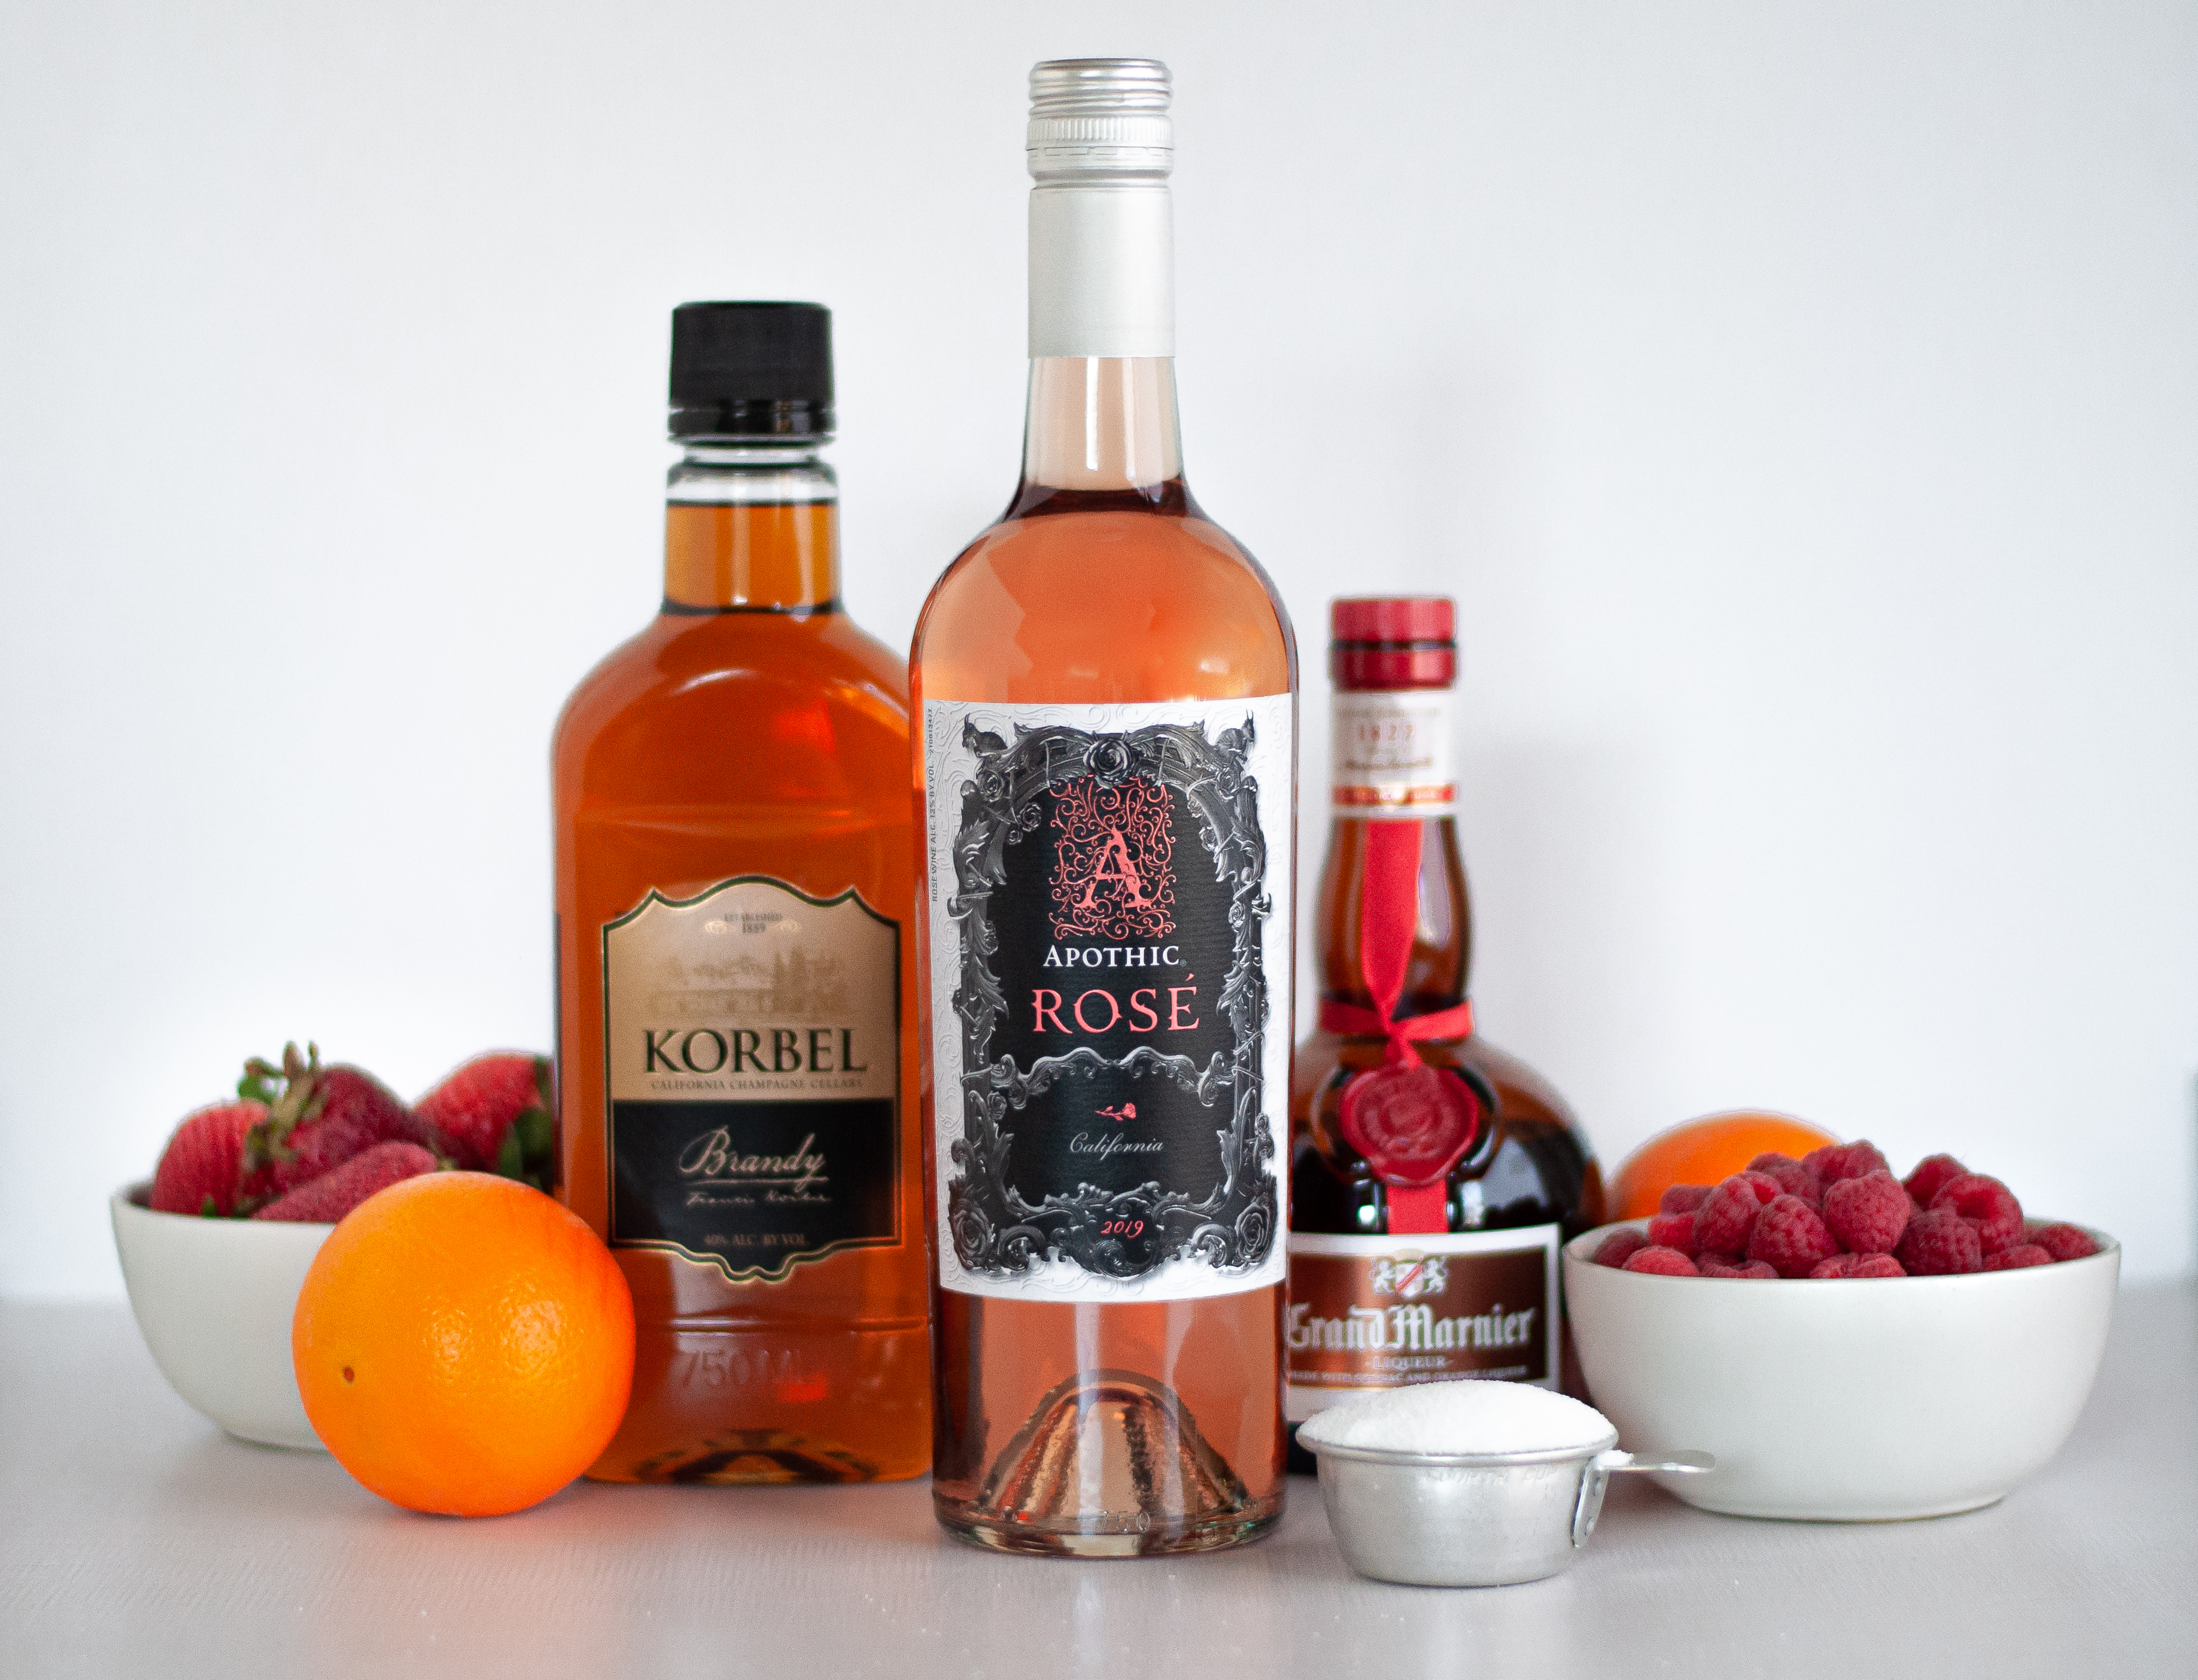 Ingredients for rosé sangria, including a bottles of rosé wine, Korbel brandy, and Grand Marnier. A ¼ cup measure filled with granulated sugar, 2 oranges, and bowls of strawberries and raspberries.